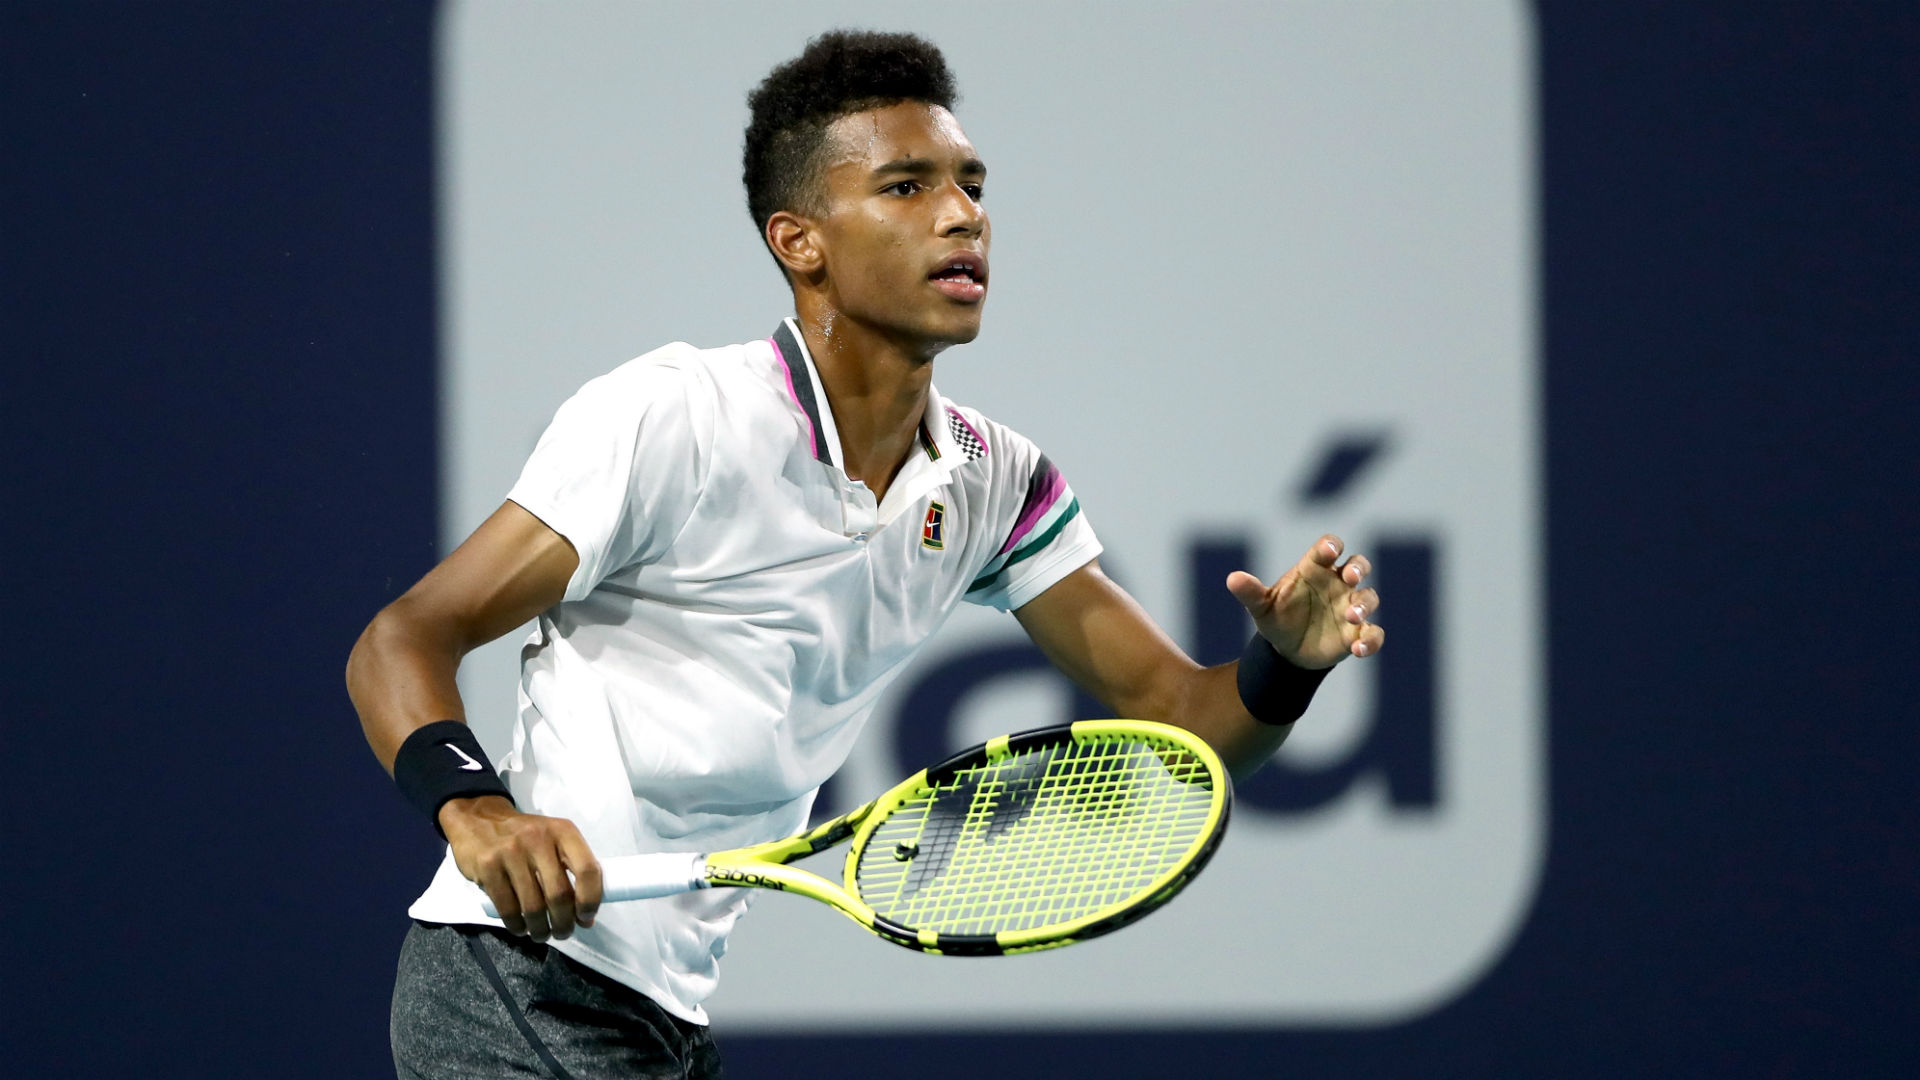 Miami Open 2019: Felix Auger-Aliassime becomes youngest player to reach ...